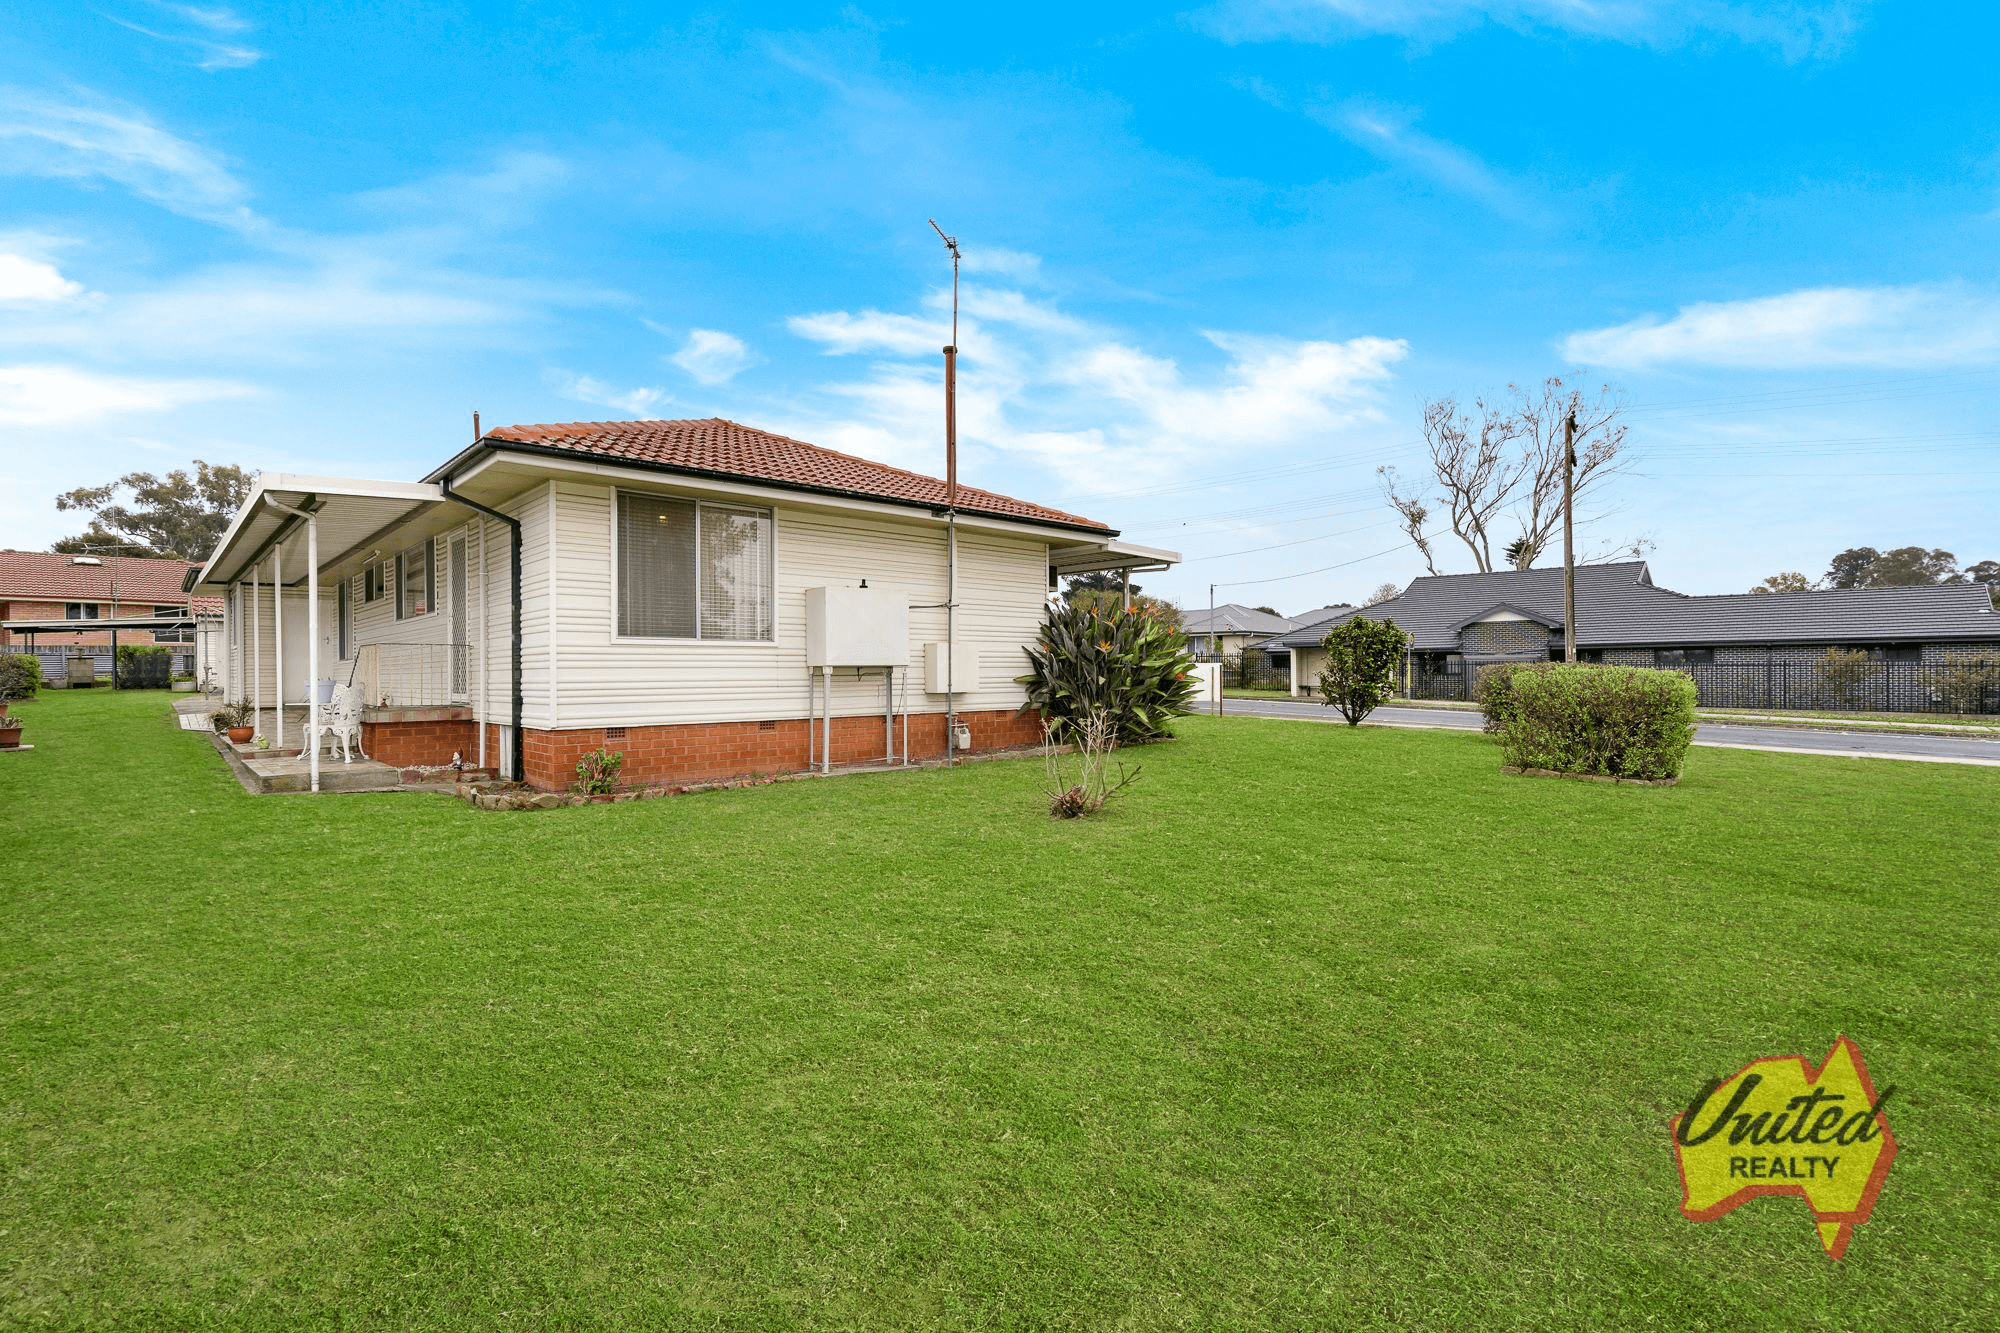 22 Thirlmere Way, Tahmoor, NSW 2573